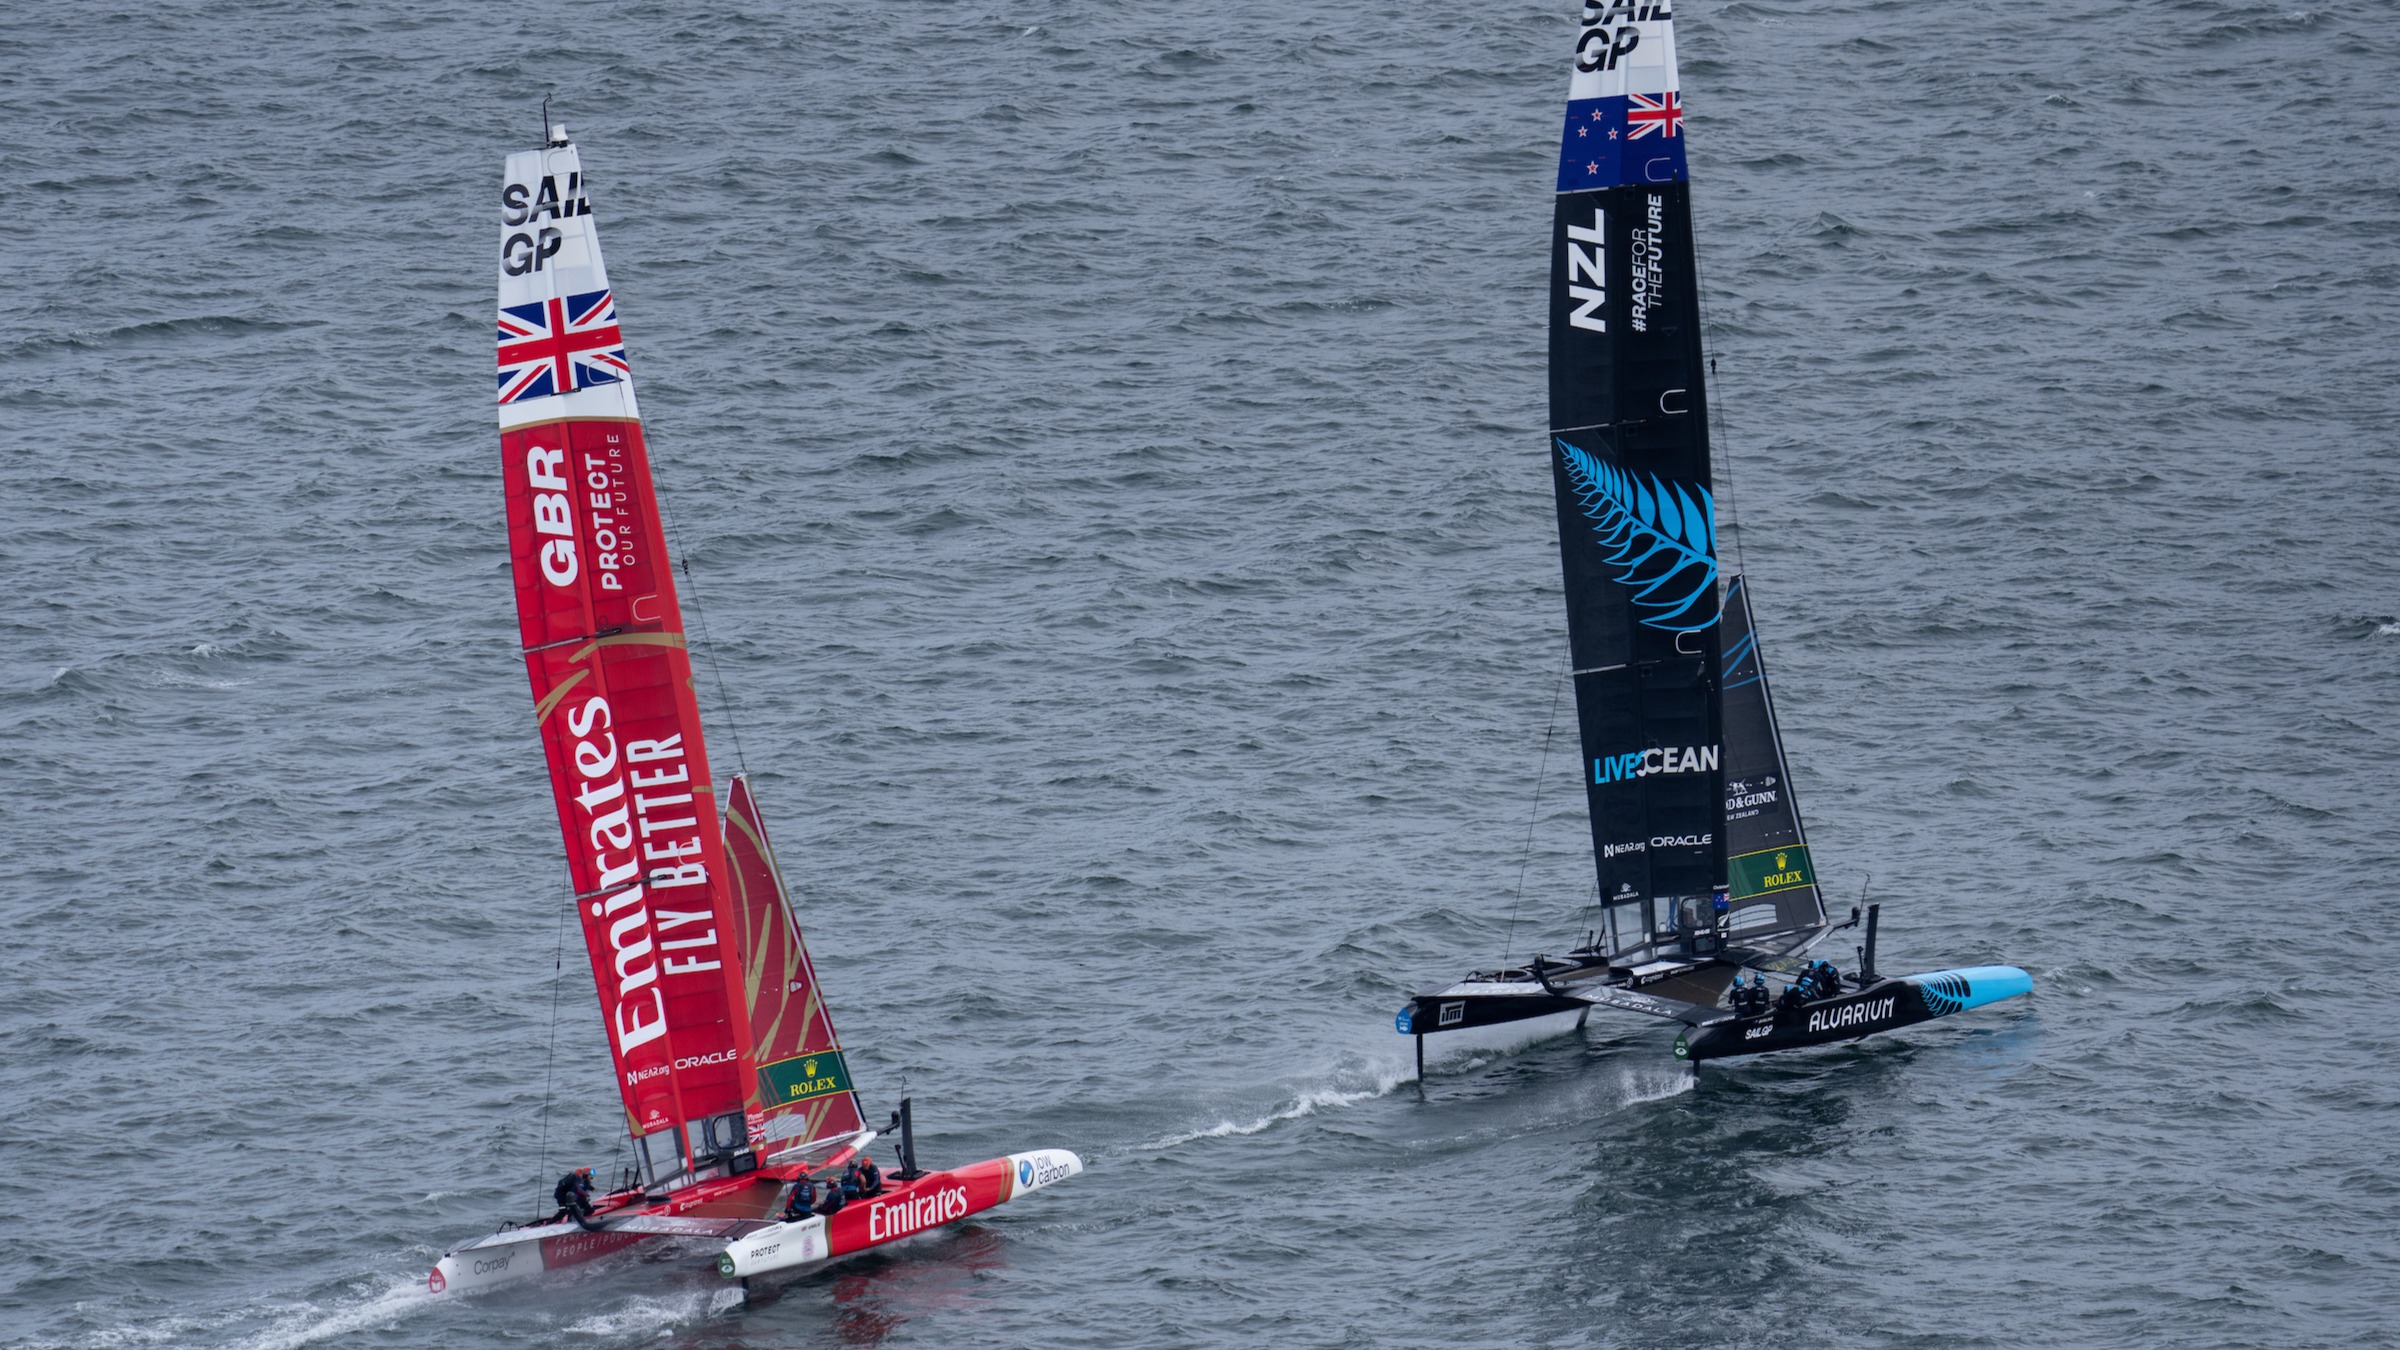 Season 3 // San Francisco Grand Final // New Zealand with Emirates GBR on practice day